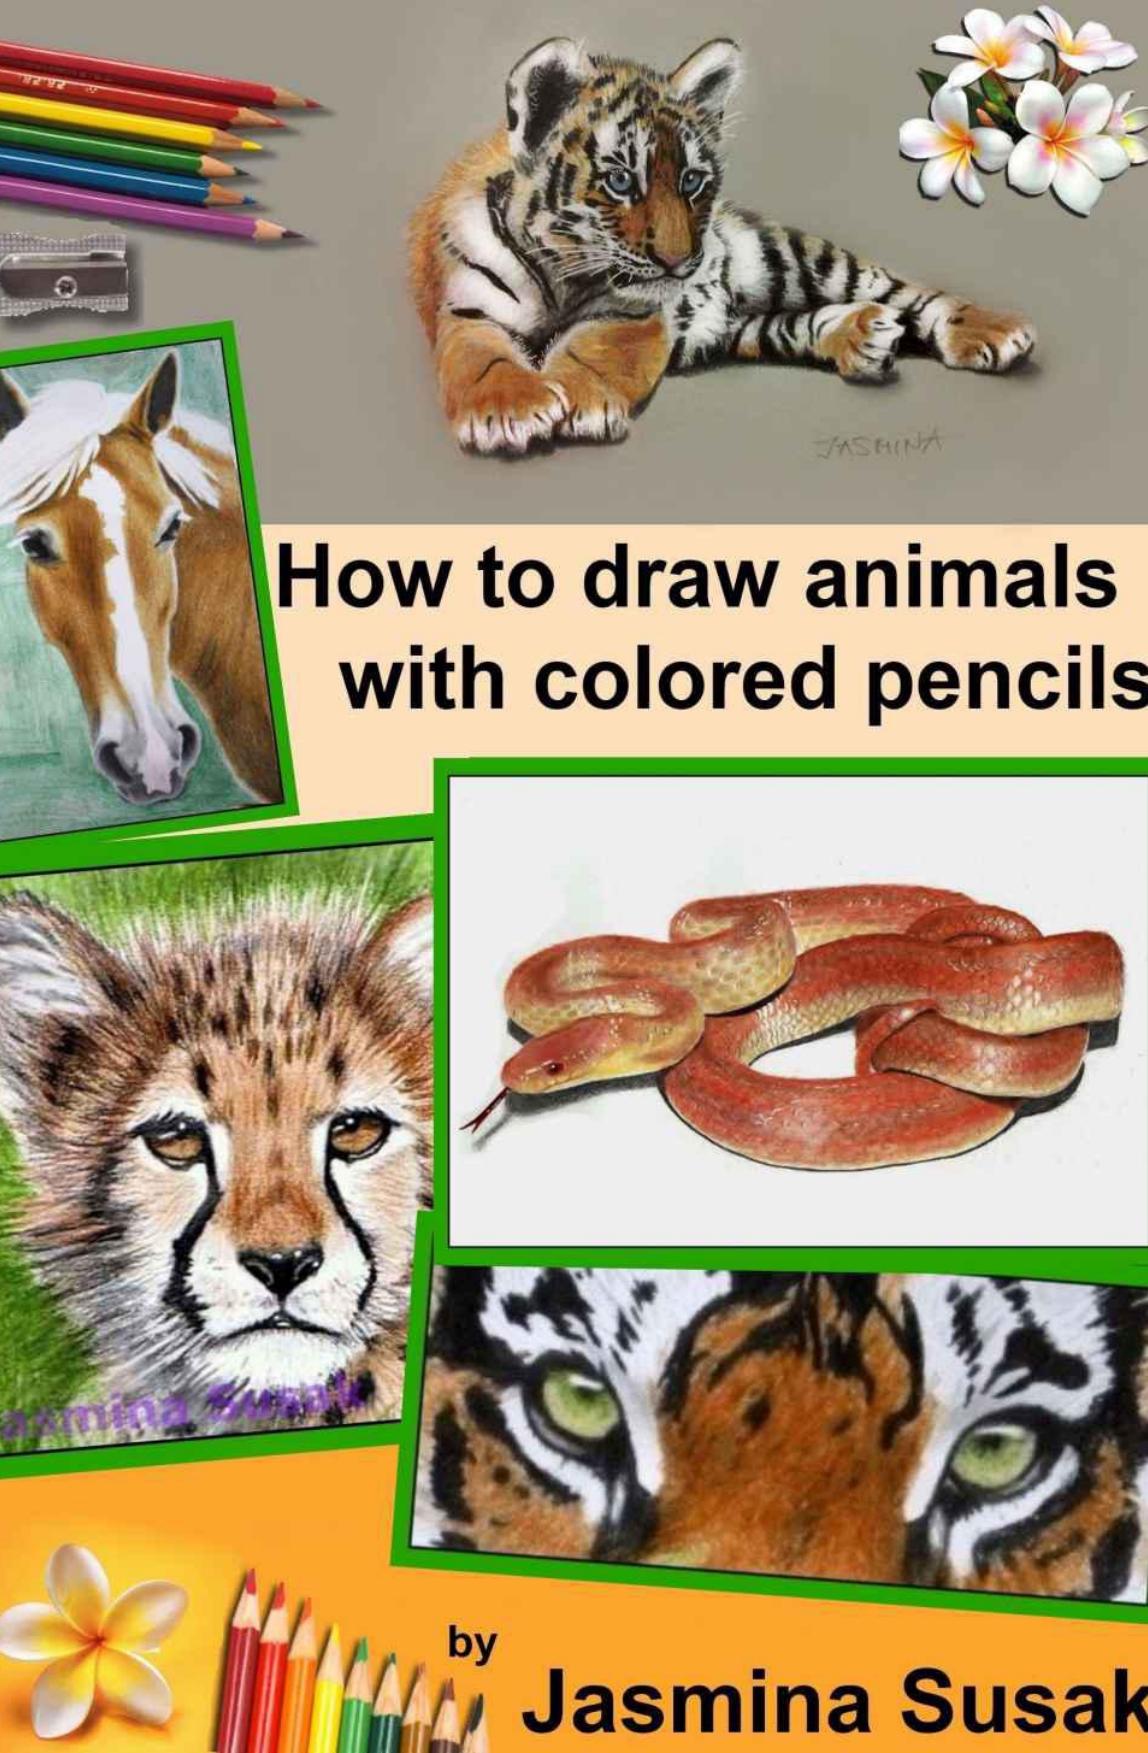 How to Draw Animals with Colored Pencils: Learn to draw Realistic Wild Animals and Pets, Tigers, Parrot, Snake, Horses Leopard Dogs, Cats and More! How to Draw Cute Animals for Kids and Adults